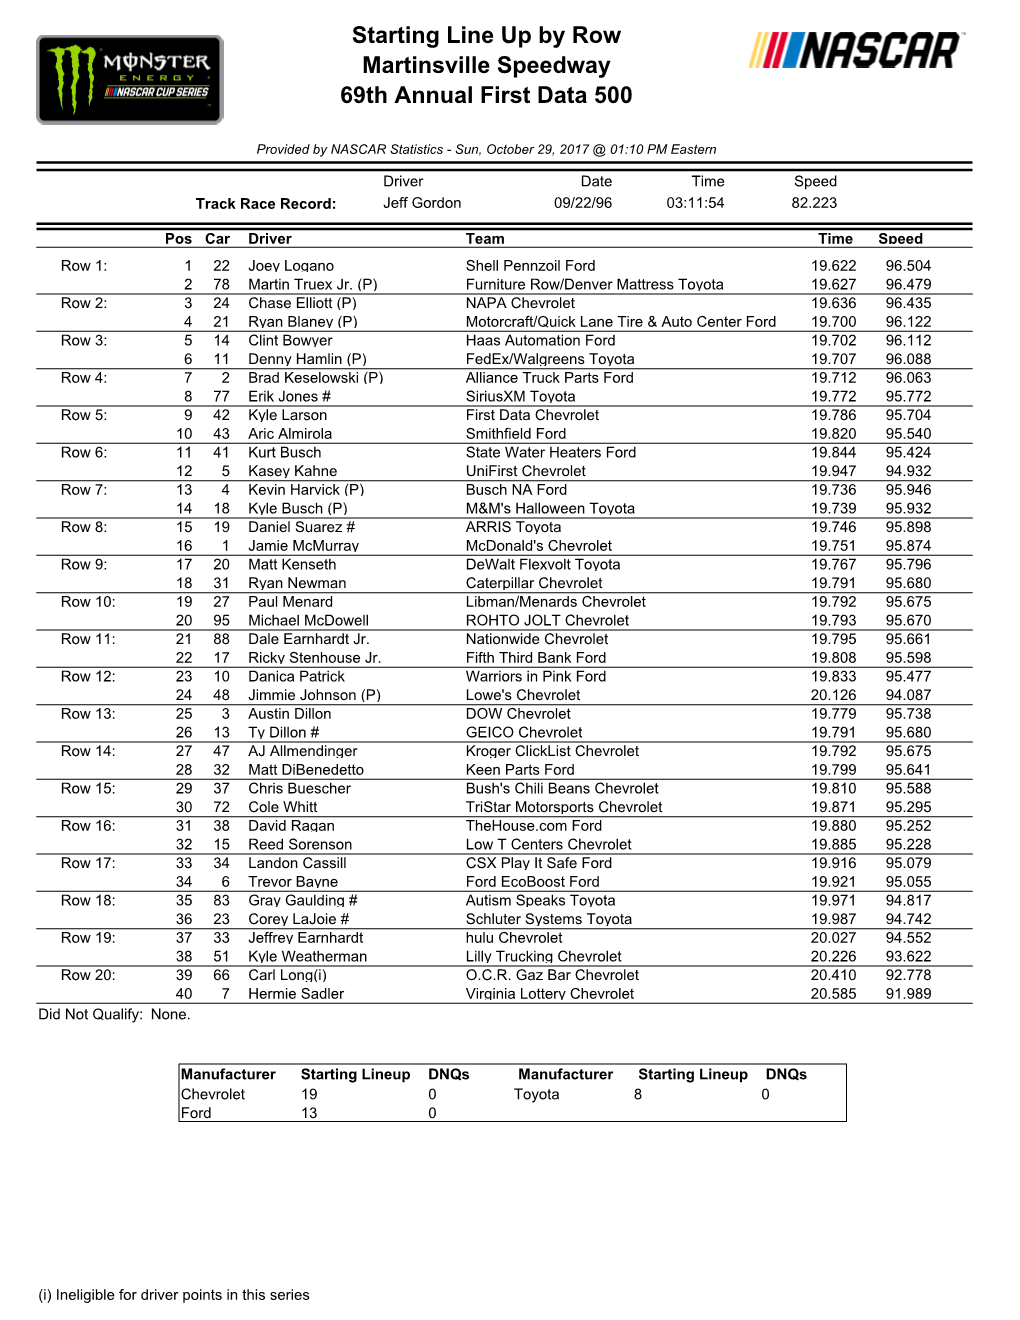 Starting Line up by Row Martinsville Speedway 69Th Annual First Data 500